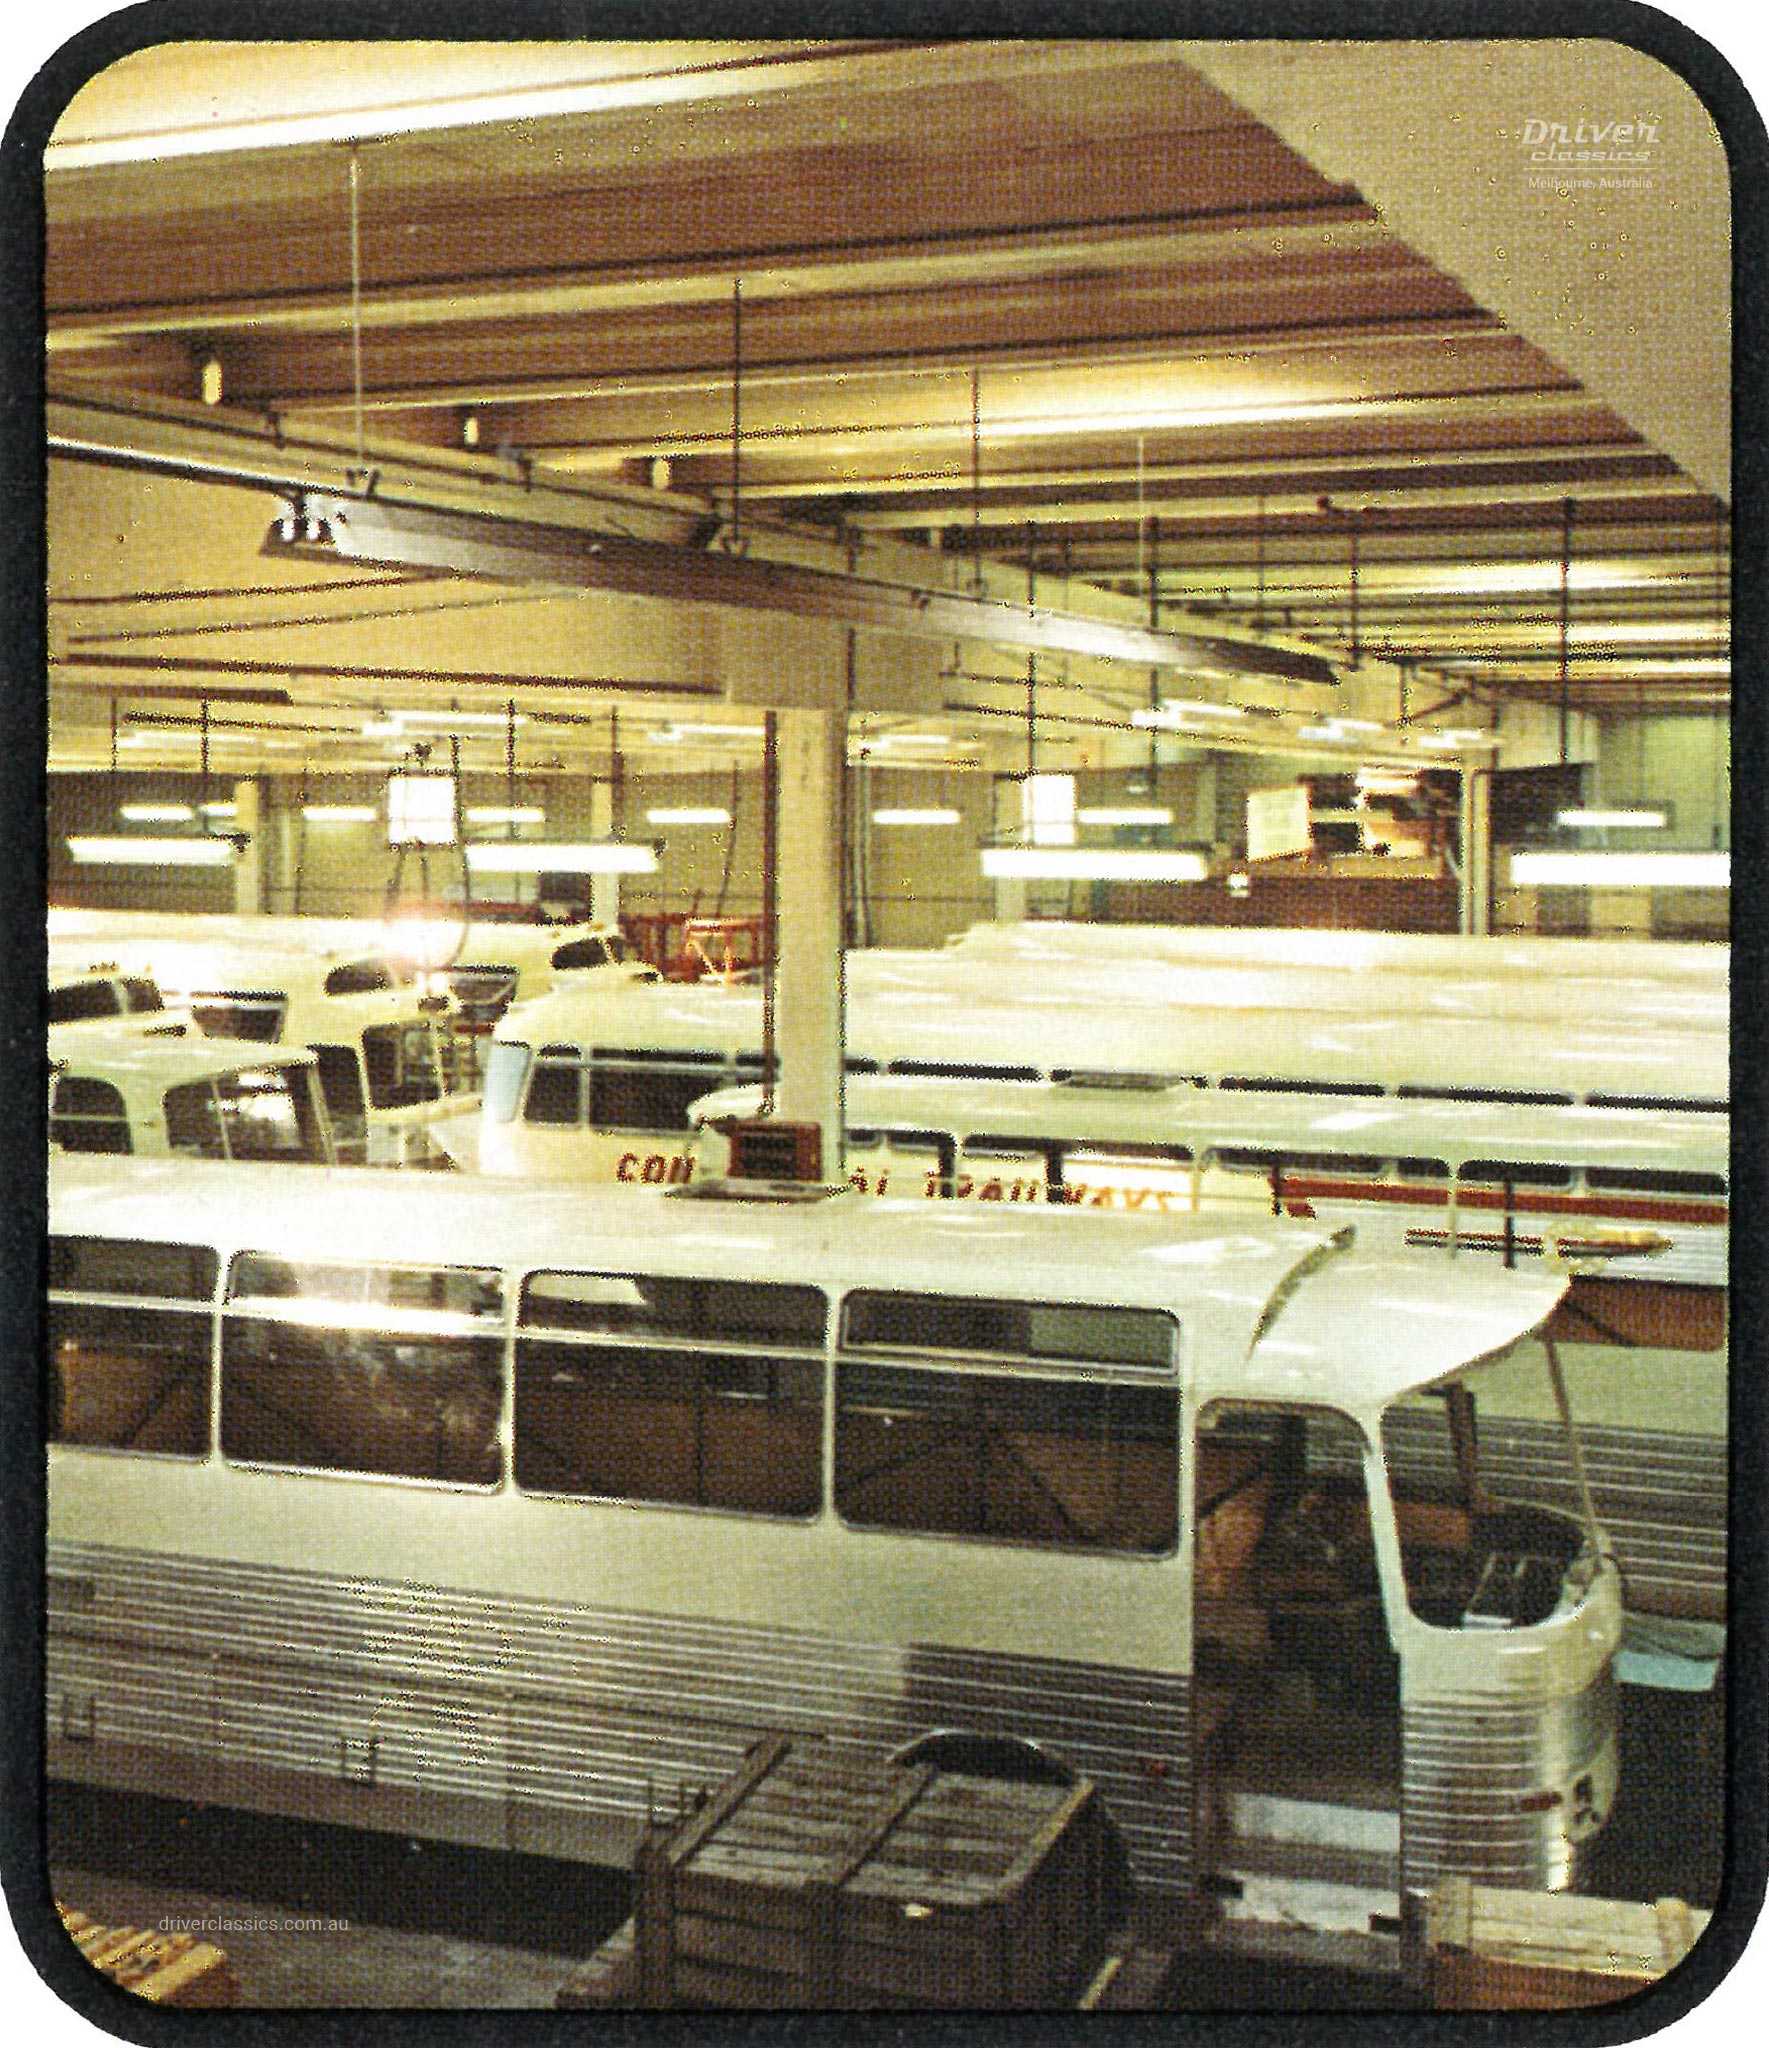 Photos of inside Bus and Car plant/factory in Brugge Belgium in 1968. Shows the production of Continental Trailways Silver Eagle Model 01s and a Model 04.